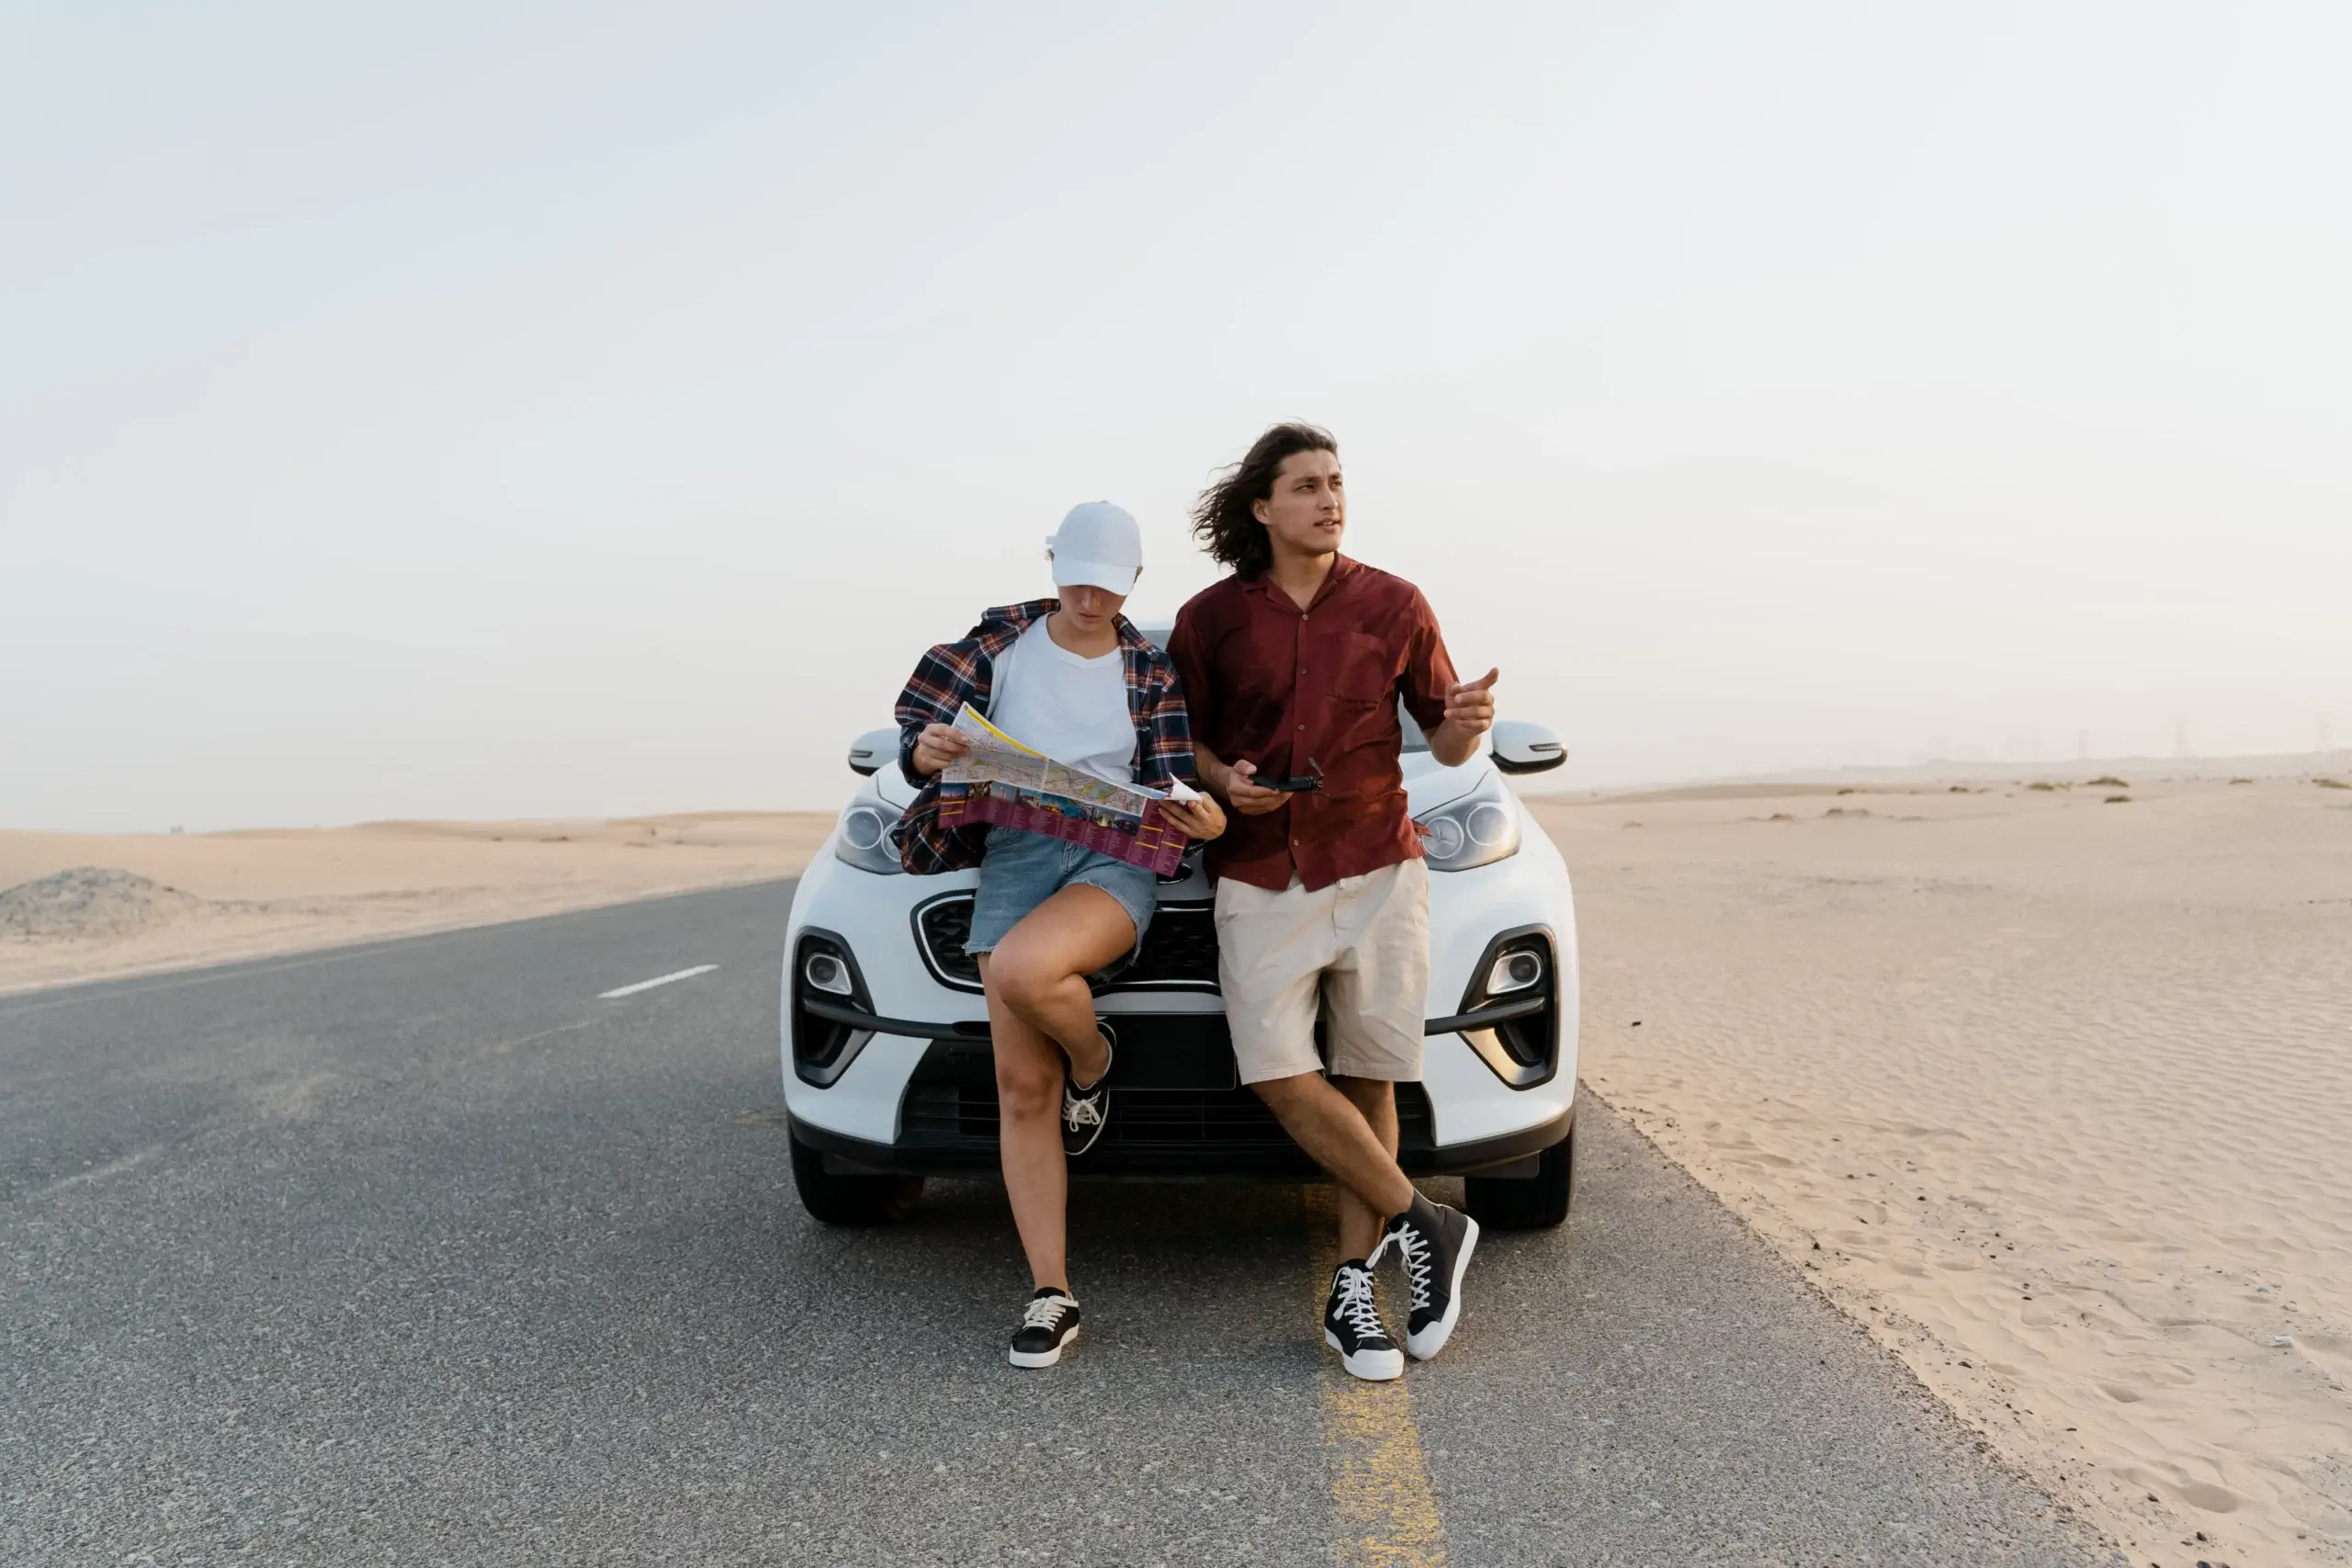 Dubai Car Rental Safety: What You Need to Know Before You Drive